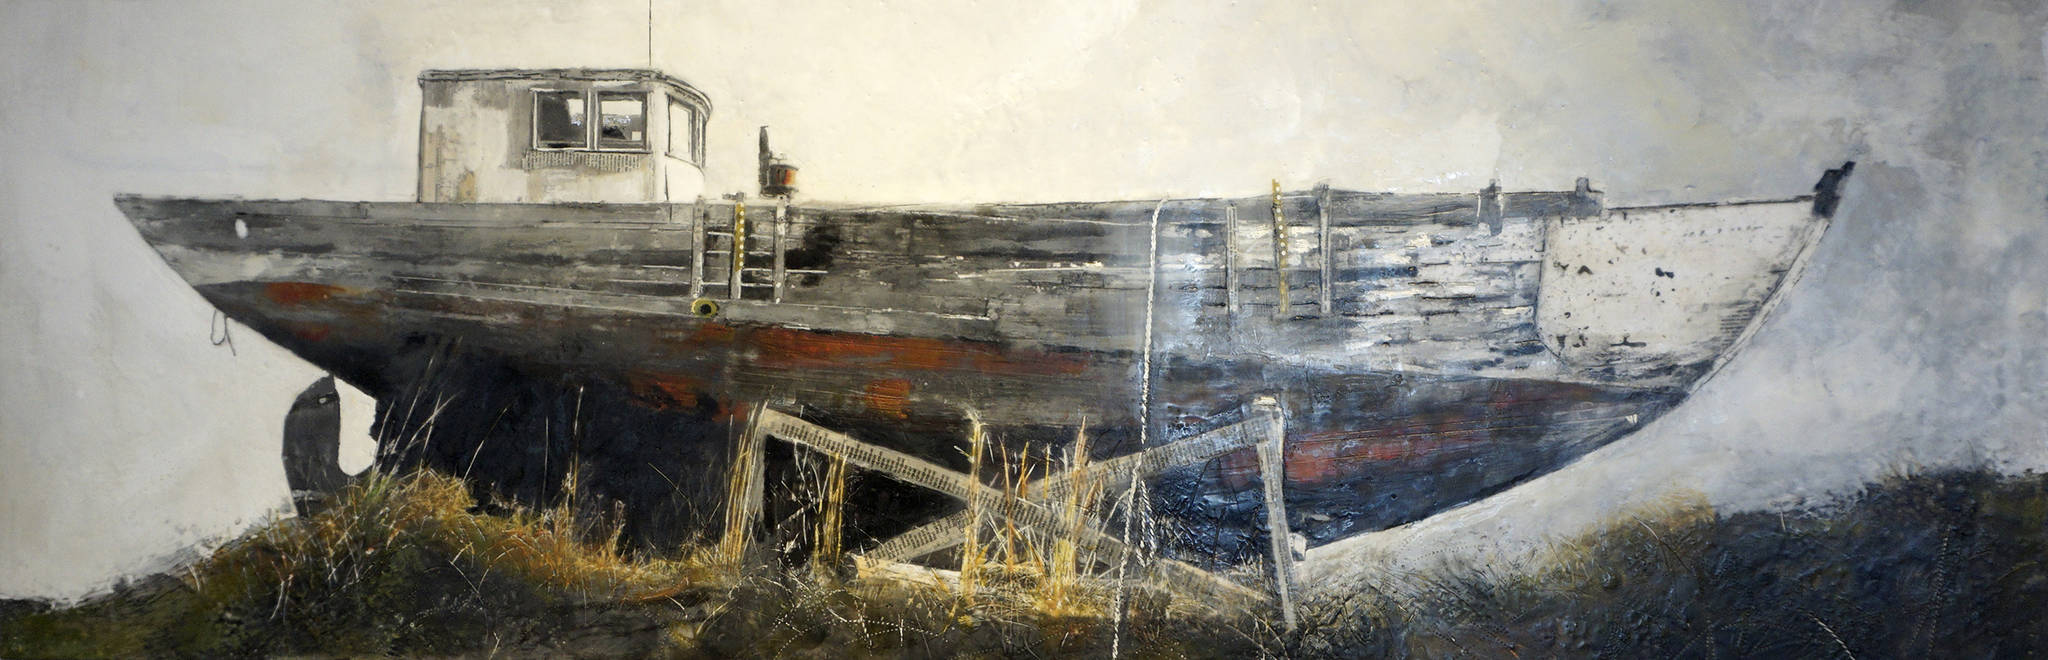 This painting of a Homer boat, “Altair,” is part of Antoinette Walker ‘s exhibit of encaustic paintings in her July 2019 show at Bunnell Street Arts Center in Homer, Alaska. (Photo by Michael Armstrong/Homer News)